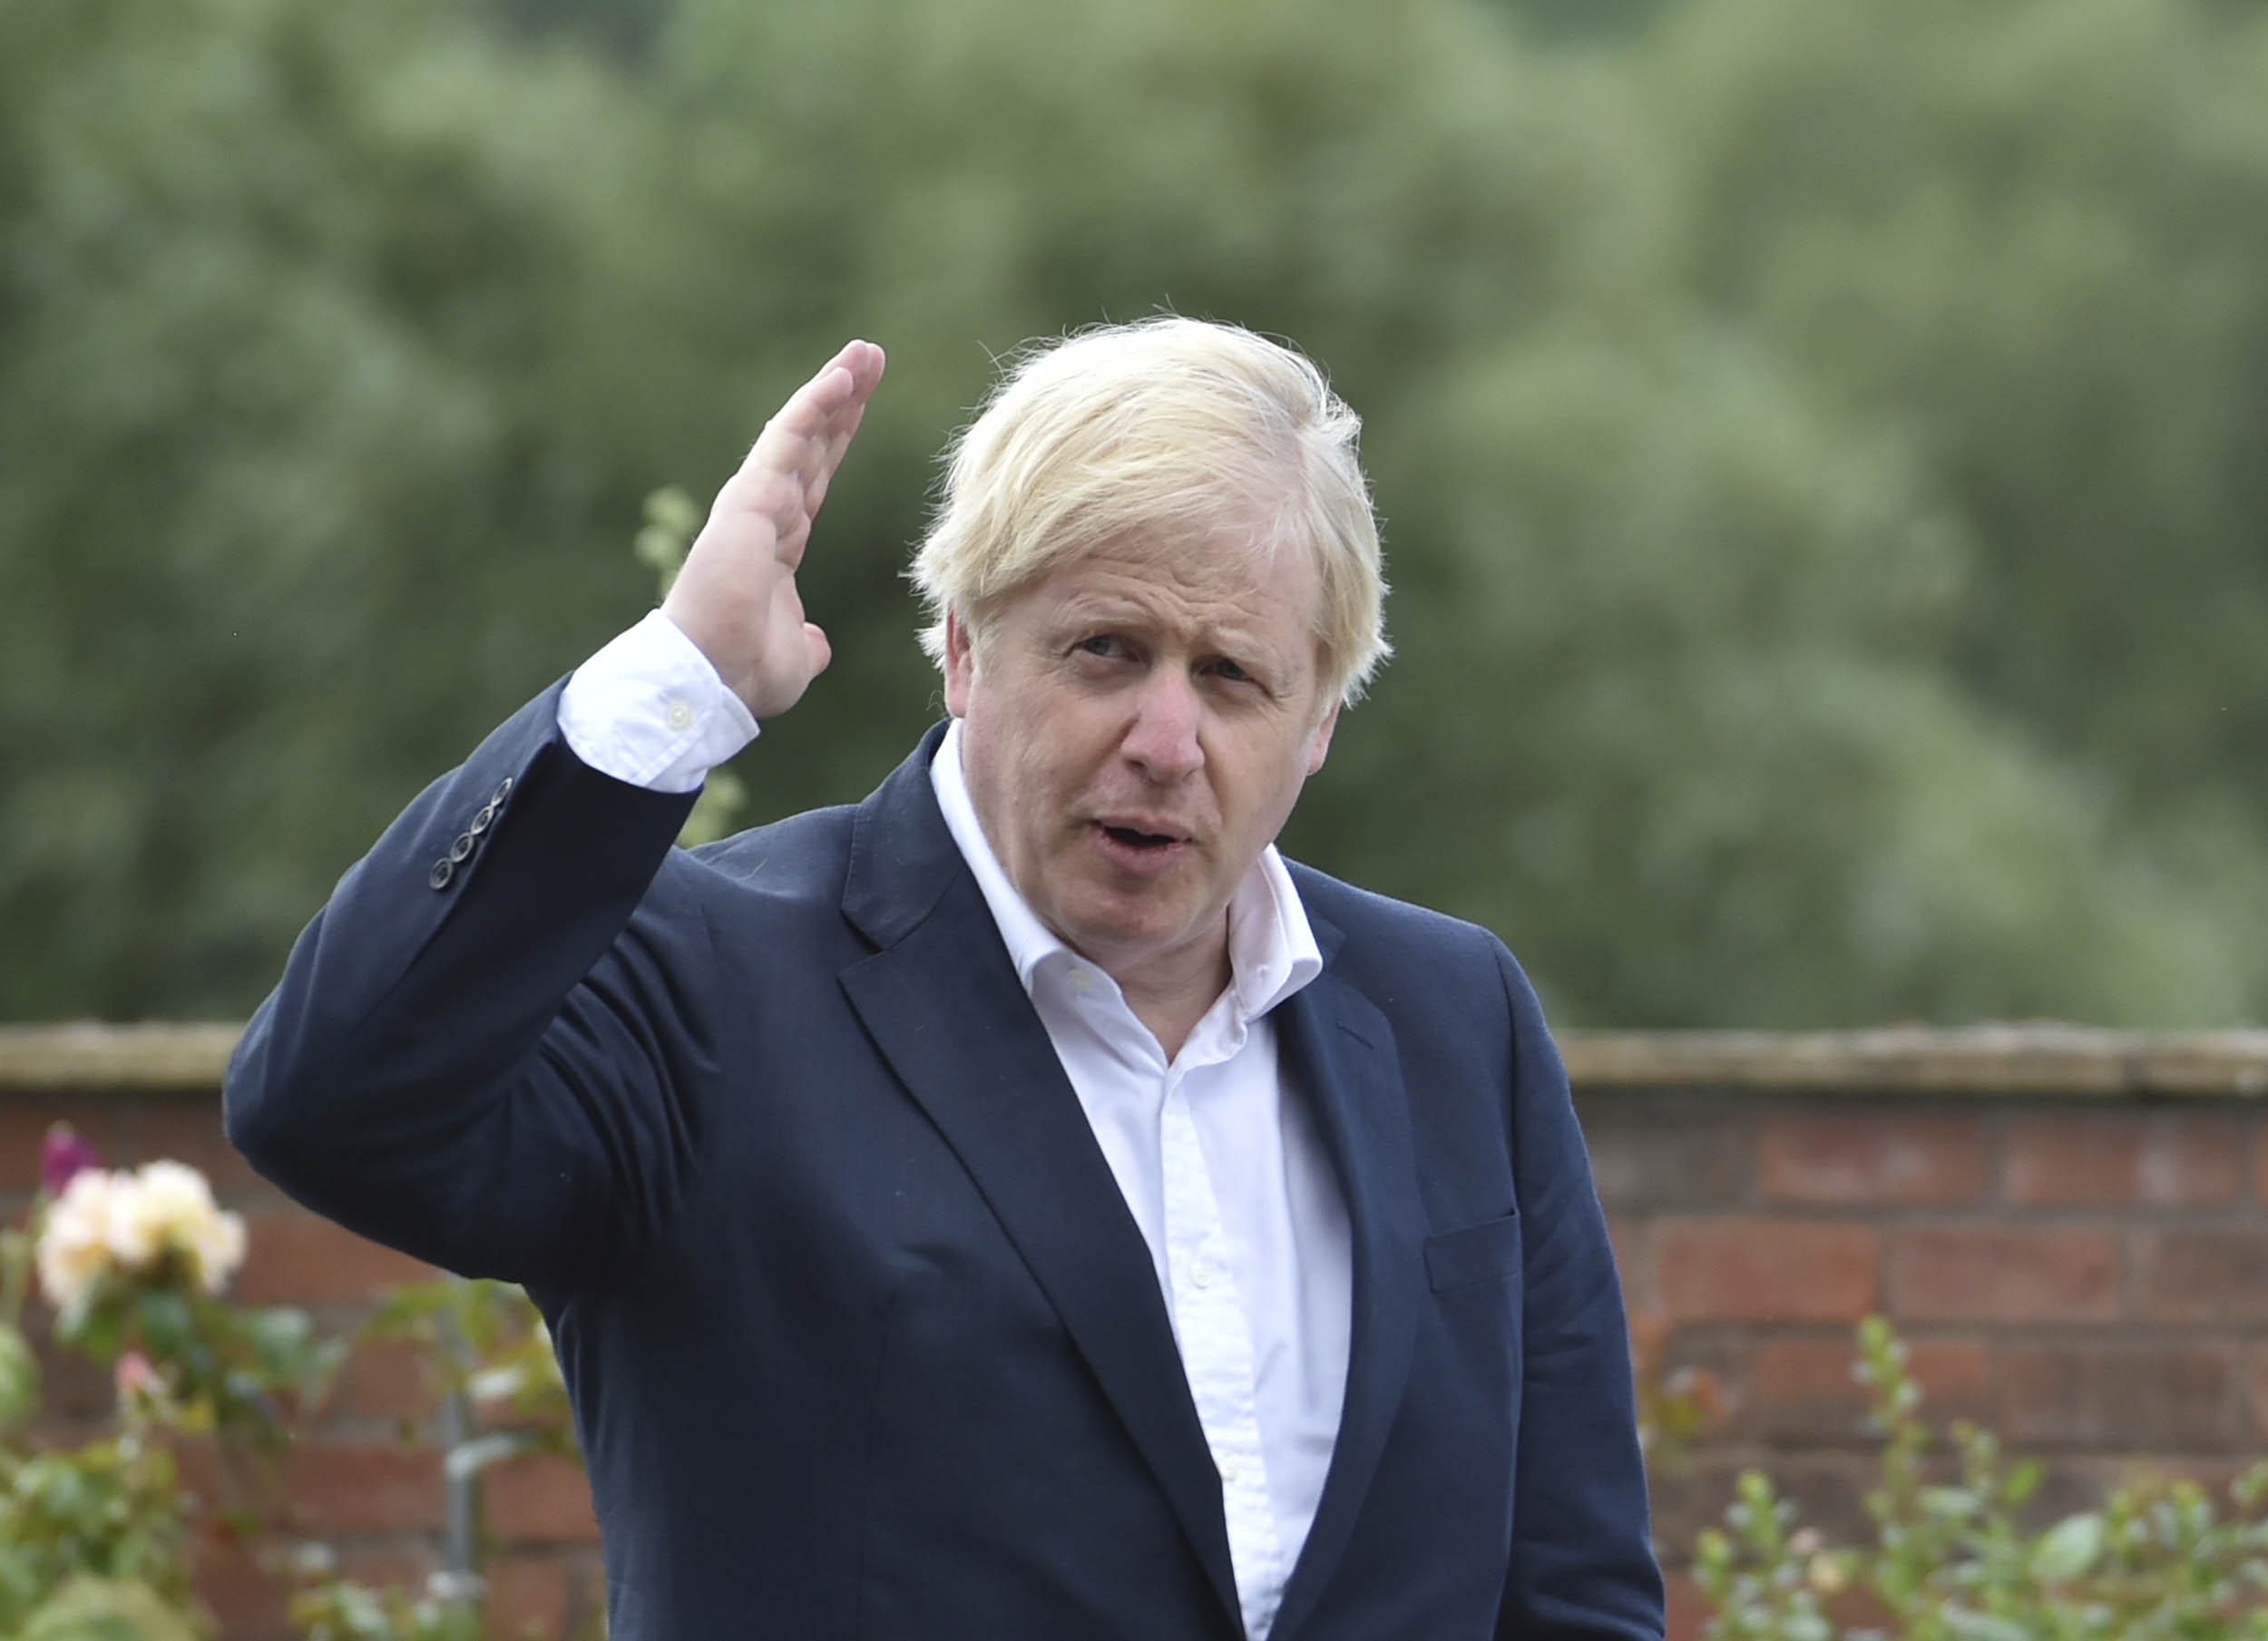 British Prime Minister Boris Johnson speaks during a visit to the Canal Side Heritage Centre in Beeston, England, on July 28.